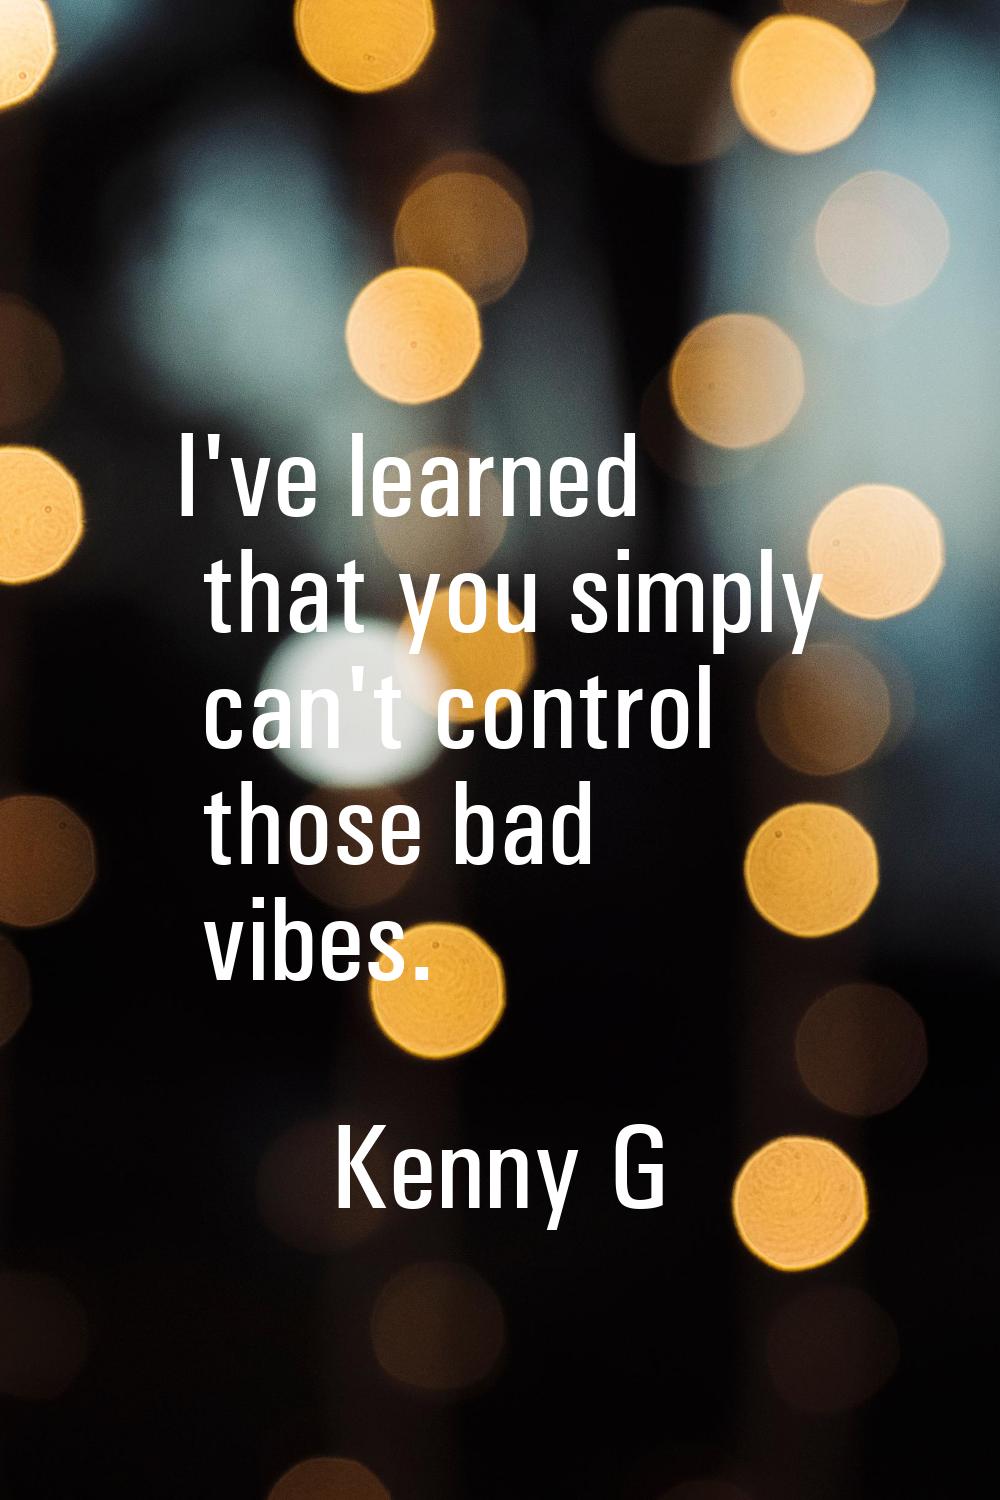 I've learned that you simply can't control those bad vibes.